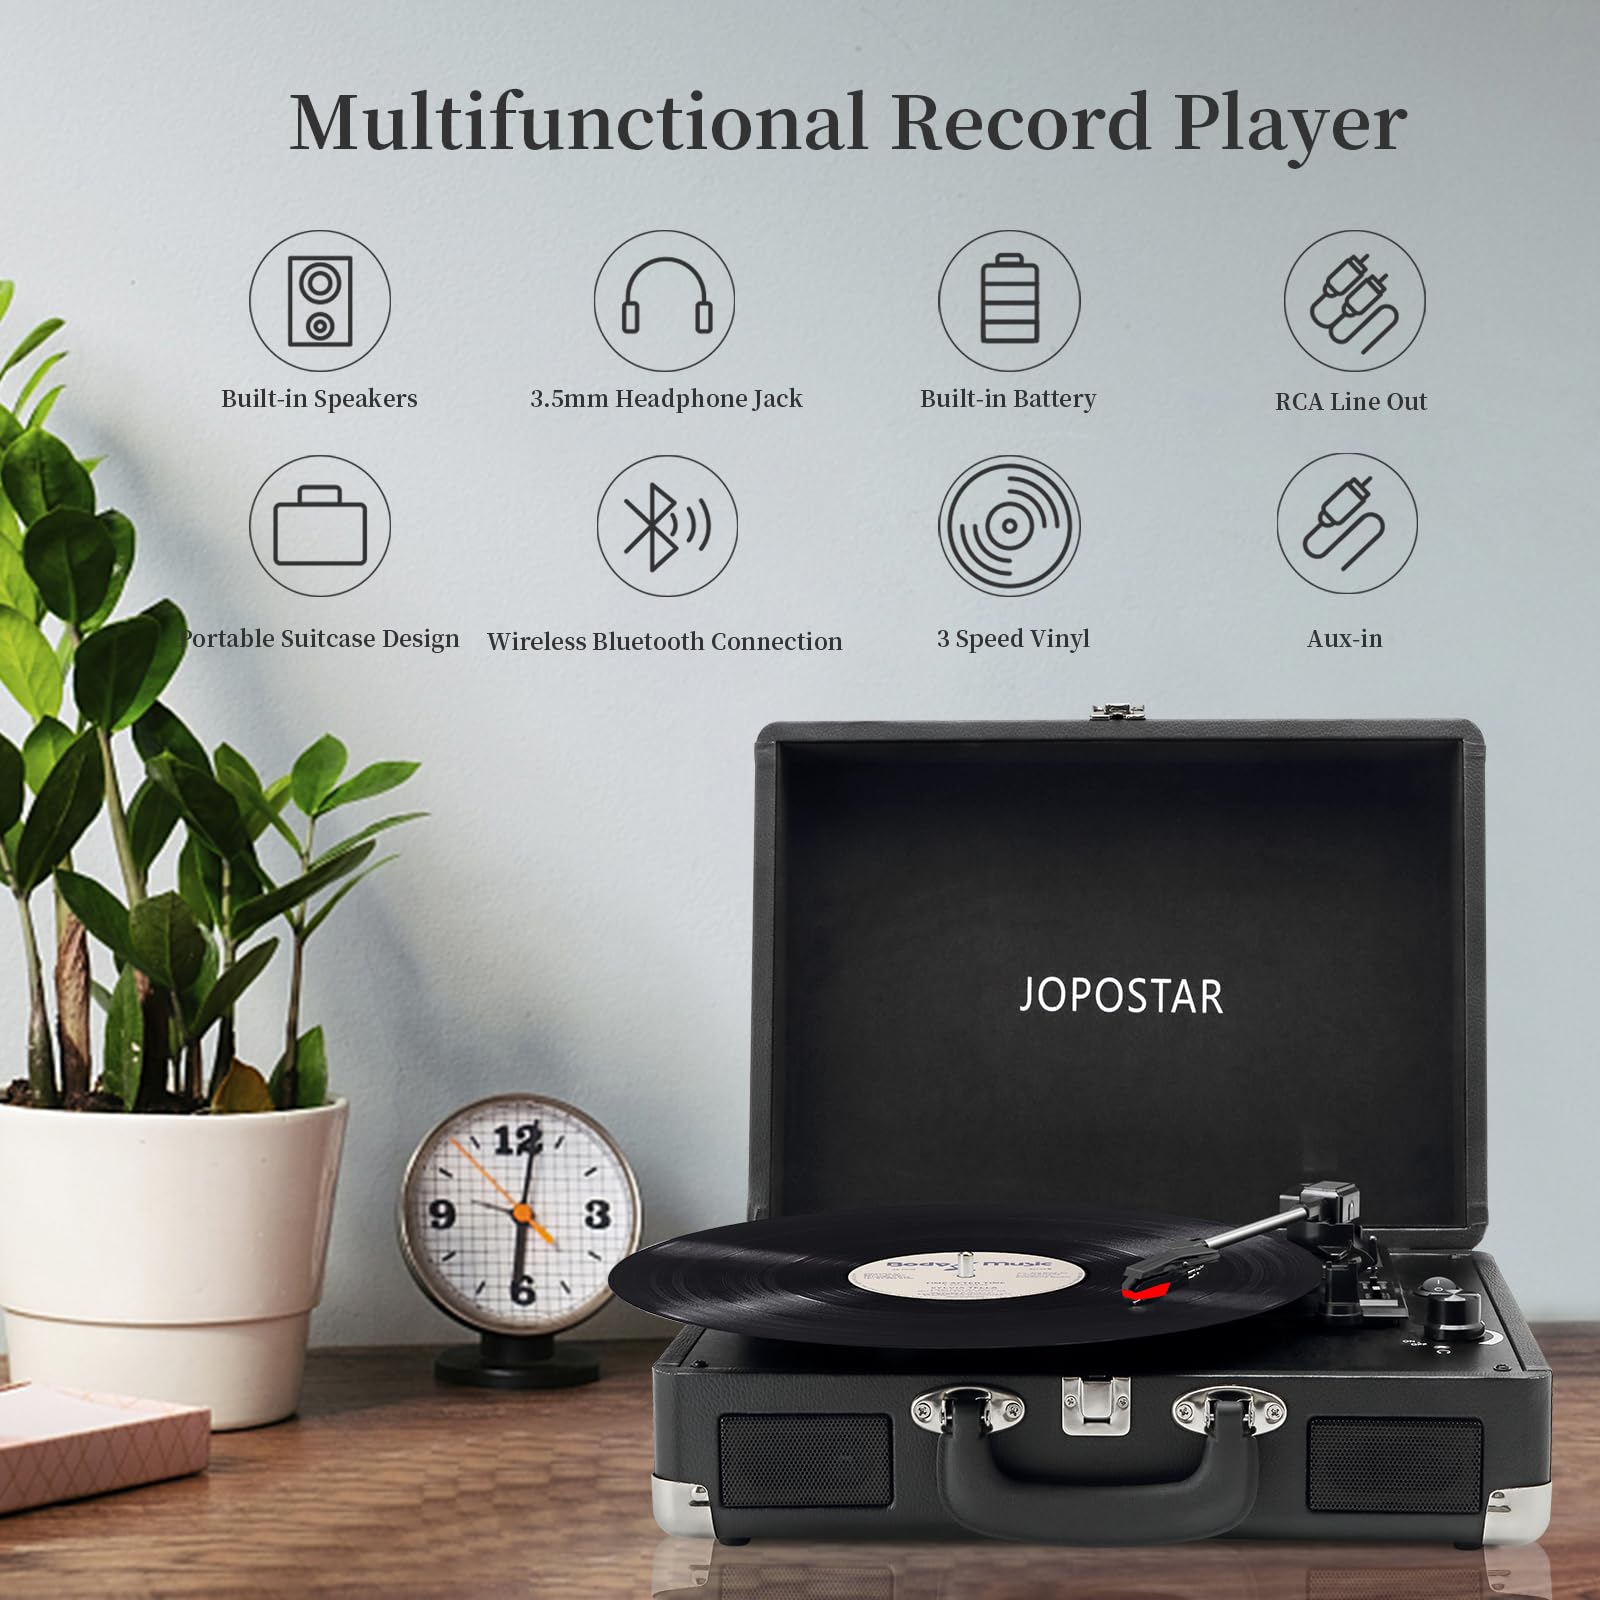 JOPOSTAR Vintage Vinyl Record Player 3 Speed Turntable Portable Suitcase with Bluetooth Built in Battery Stereo Speakers 3.5mm Headphone Jack, Black